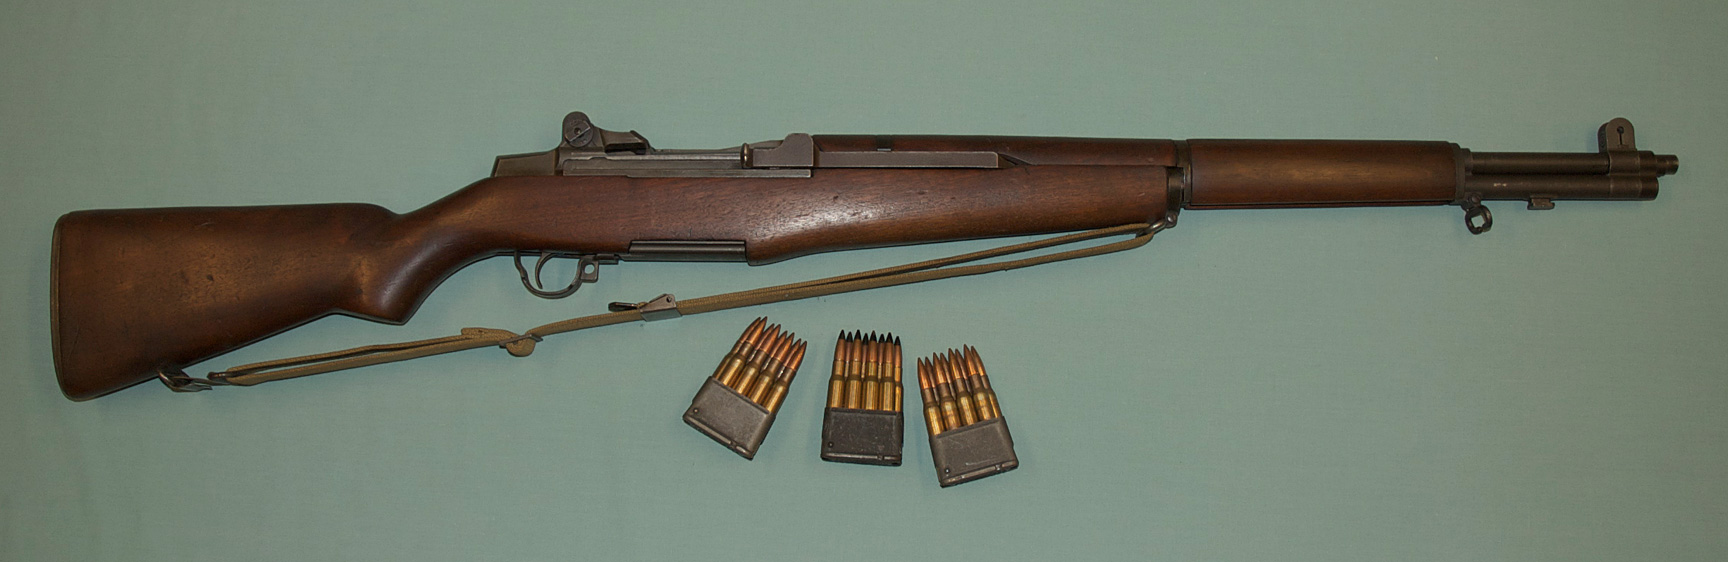 photo of rifle as an example of rifle uses 101 blog